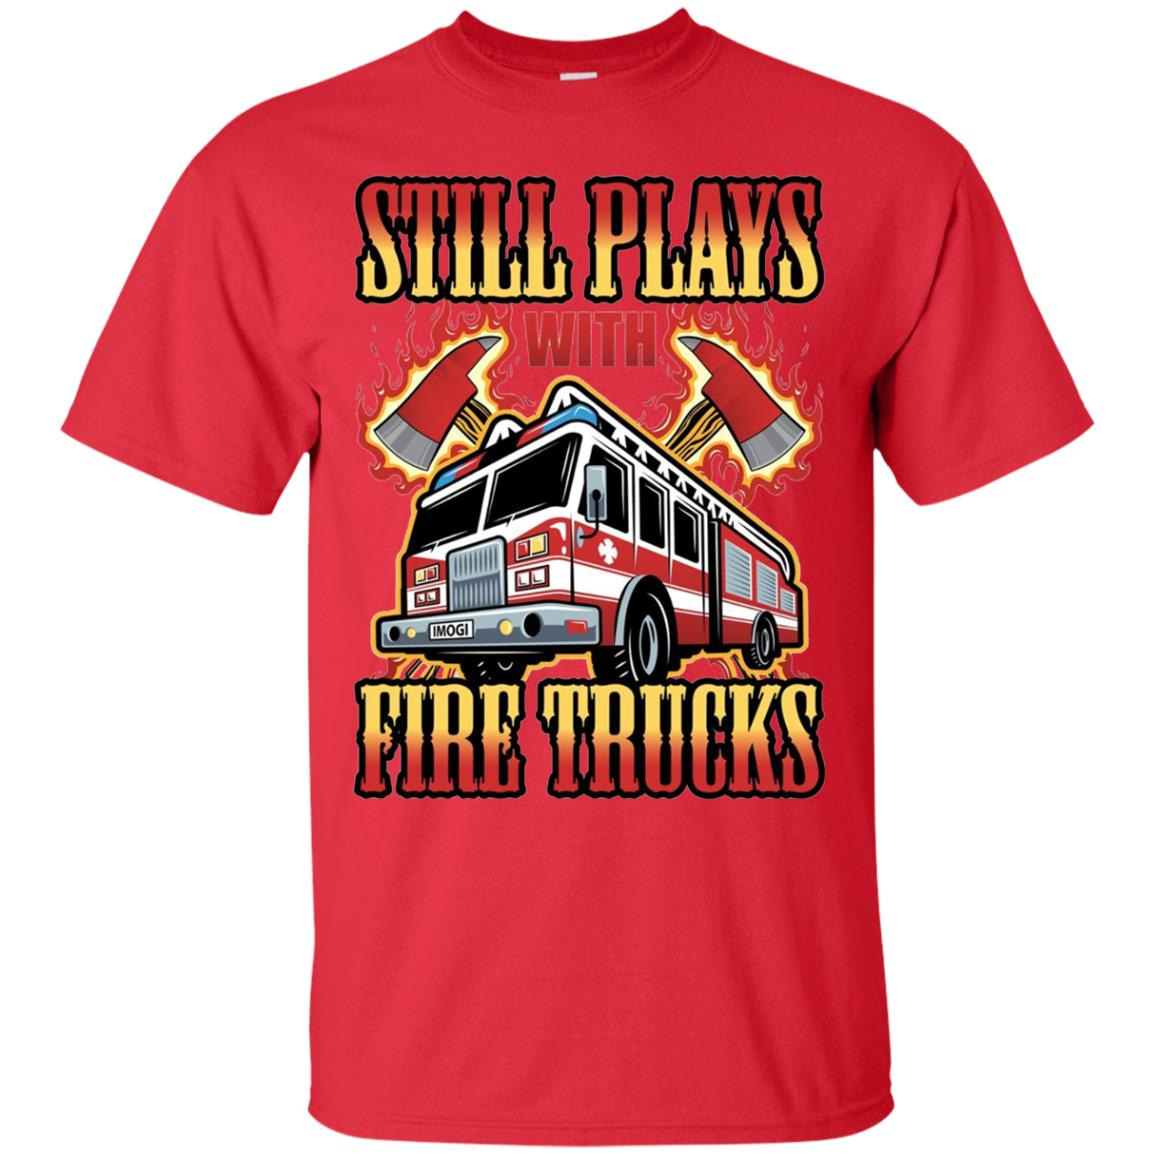 Inktee Store - Still Plays With Fire Trucks Firefighter Funny Men’s T-Shirt Image